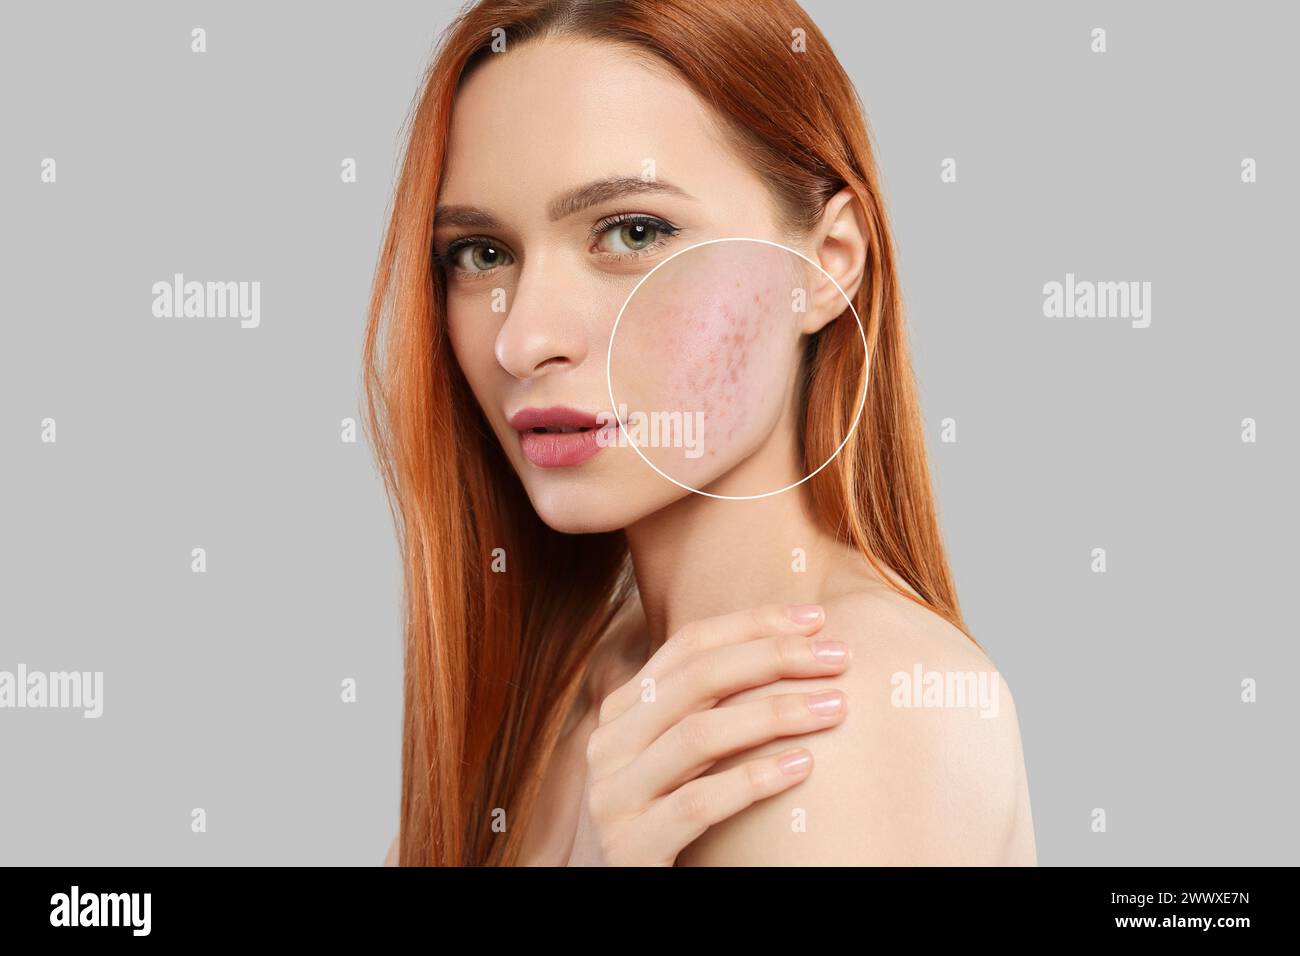 Woman with acne on her face on grey background. Zoomed area showing problem skin Stock Photo